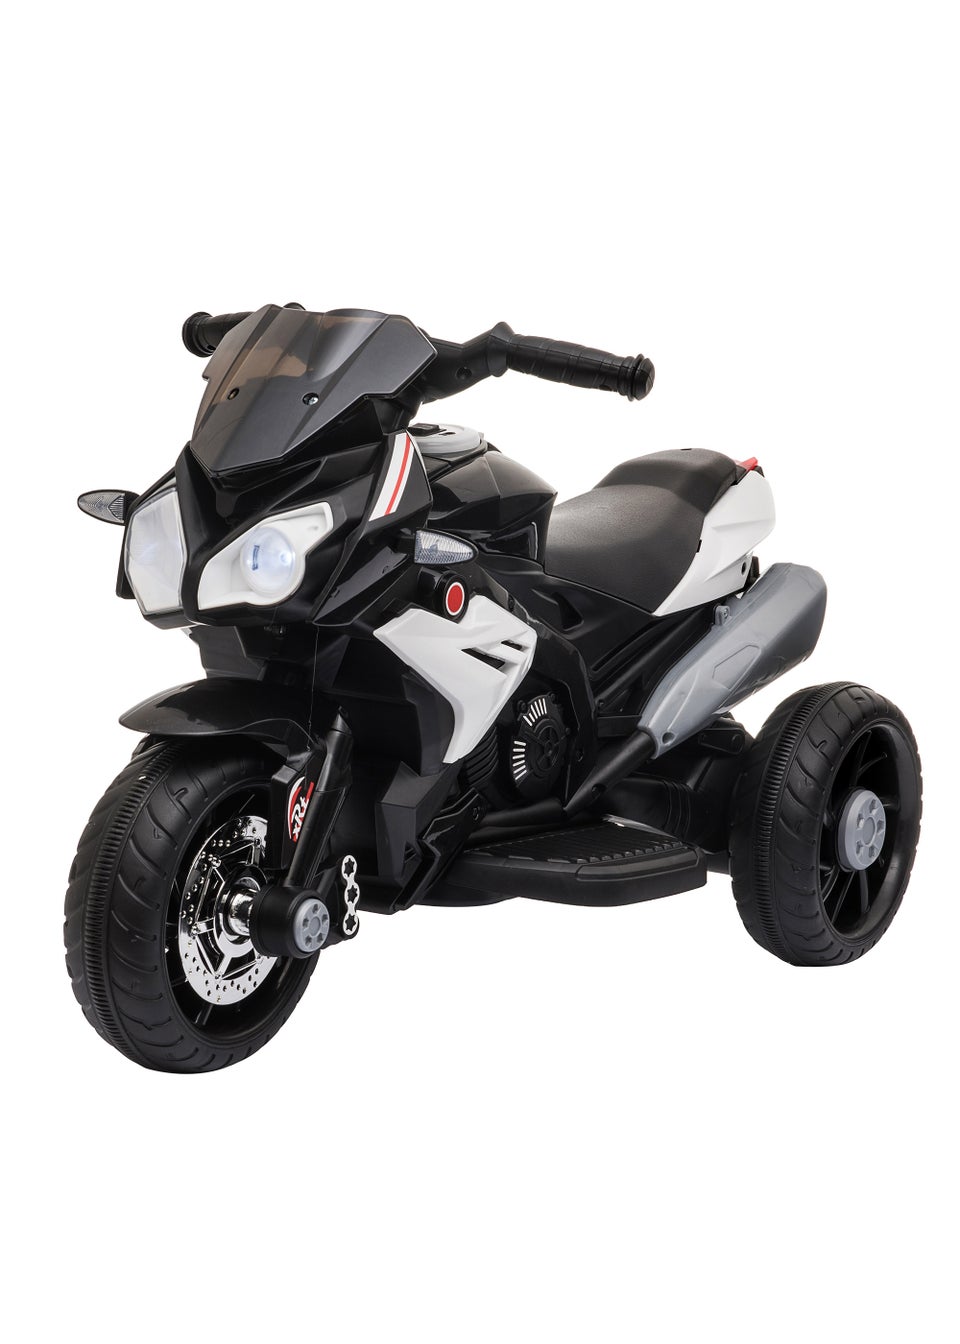 HOMCOM Kids Electric Motorcycle Ride-On Toy 6V Battery with Music, Horn and Lights (Black)